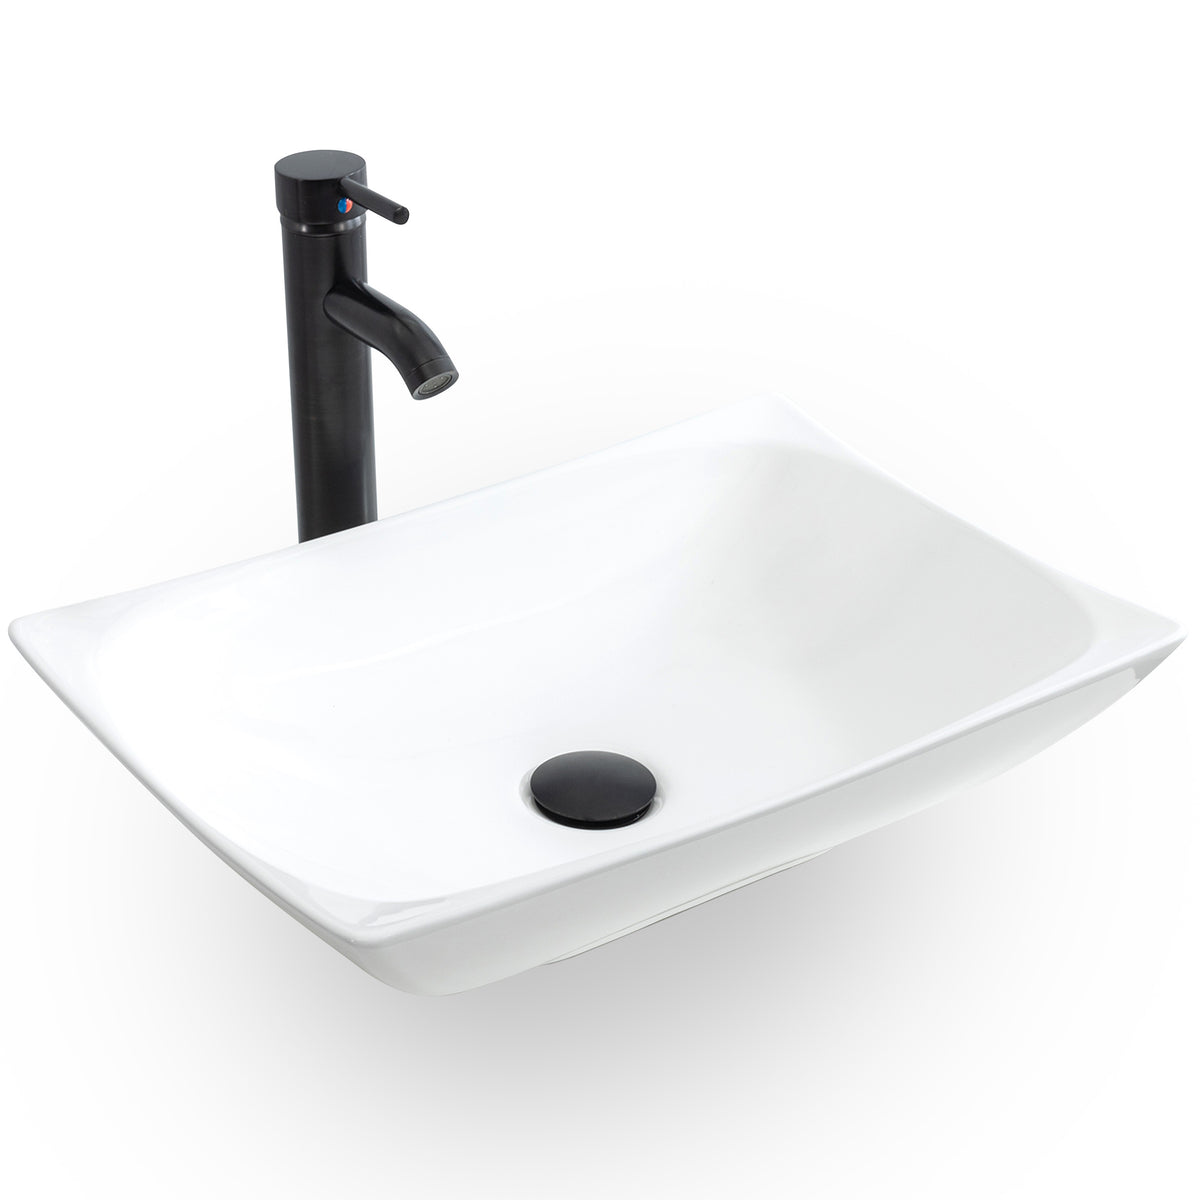 Bathroom Vessel Sink Combo Ceramic Bowl & Faucet & Pop Up Drain - White Curved